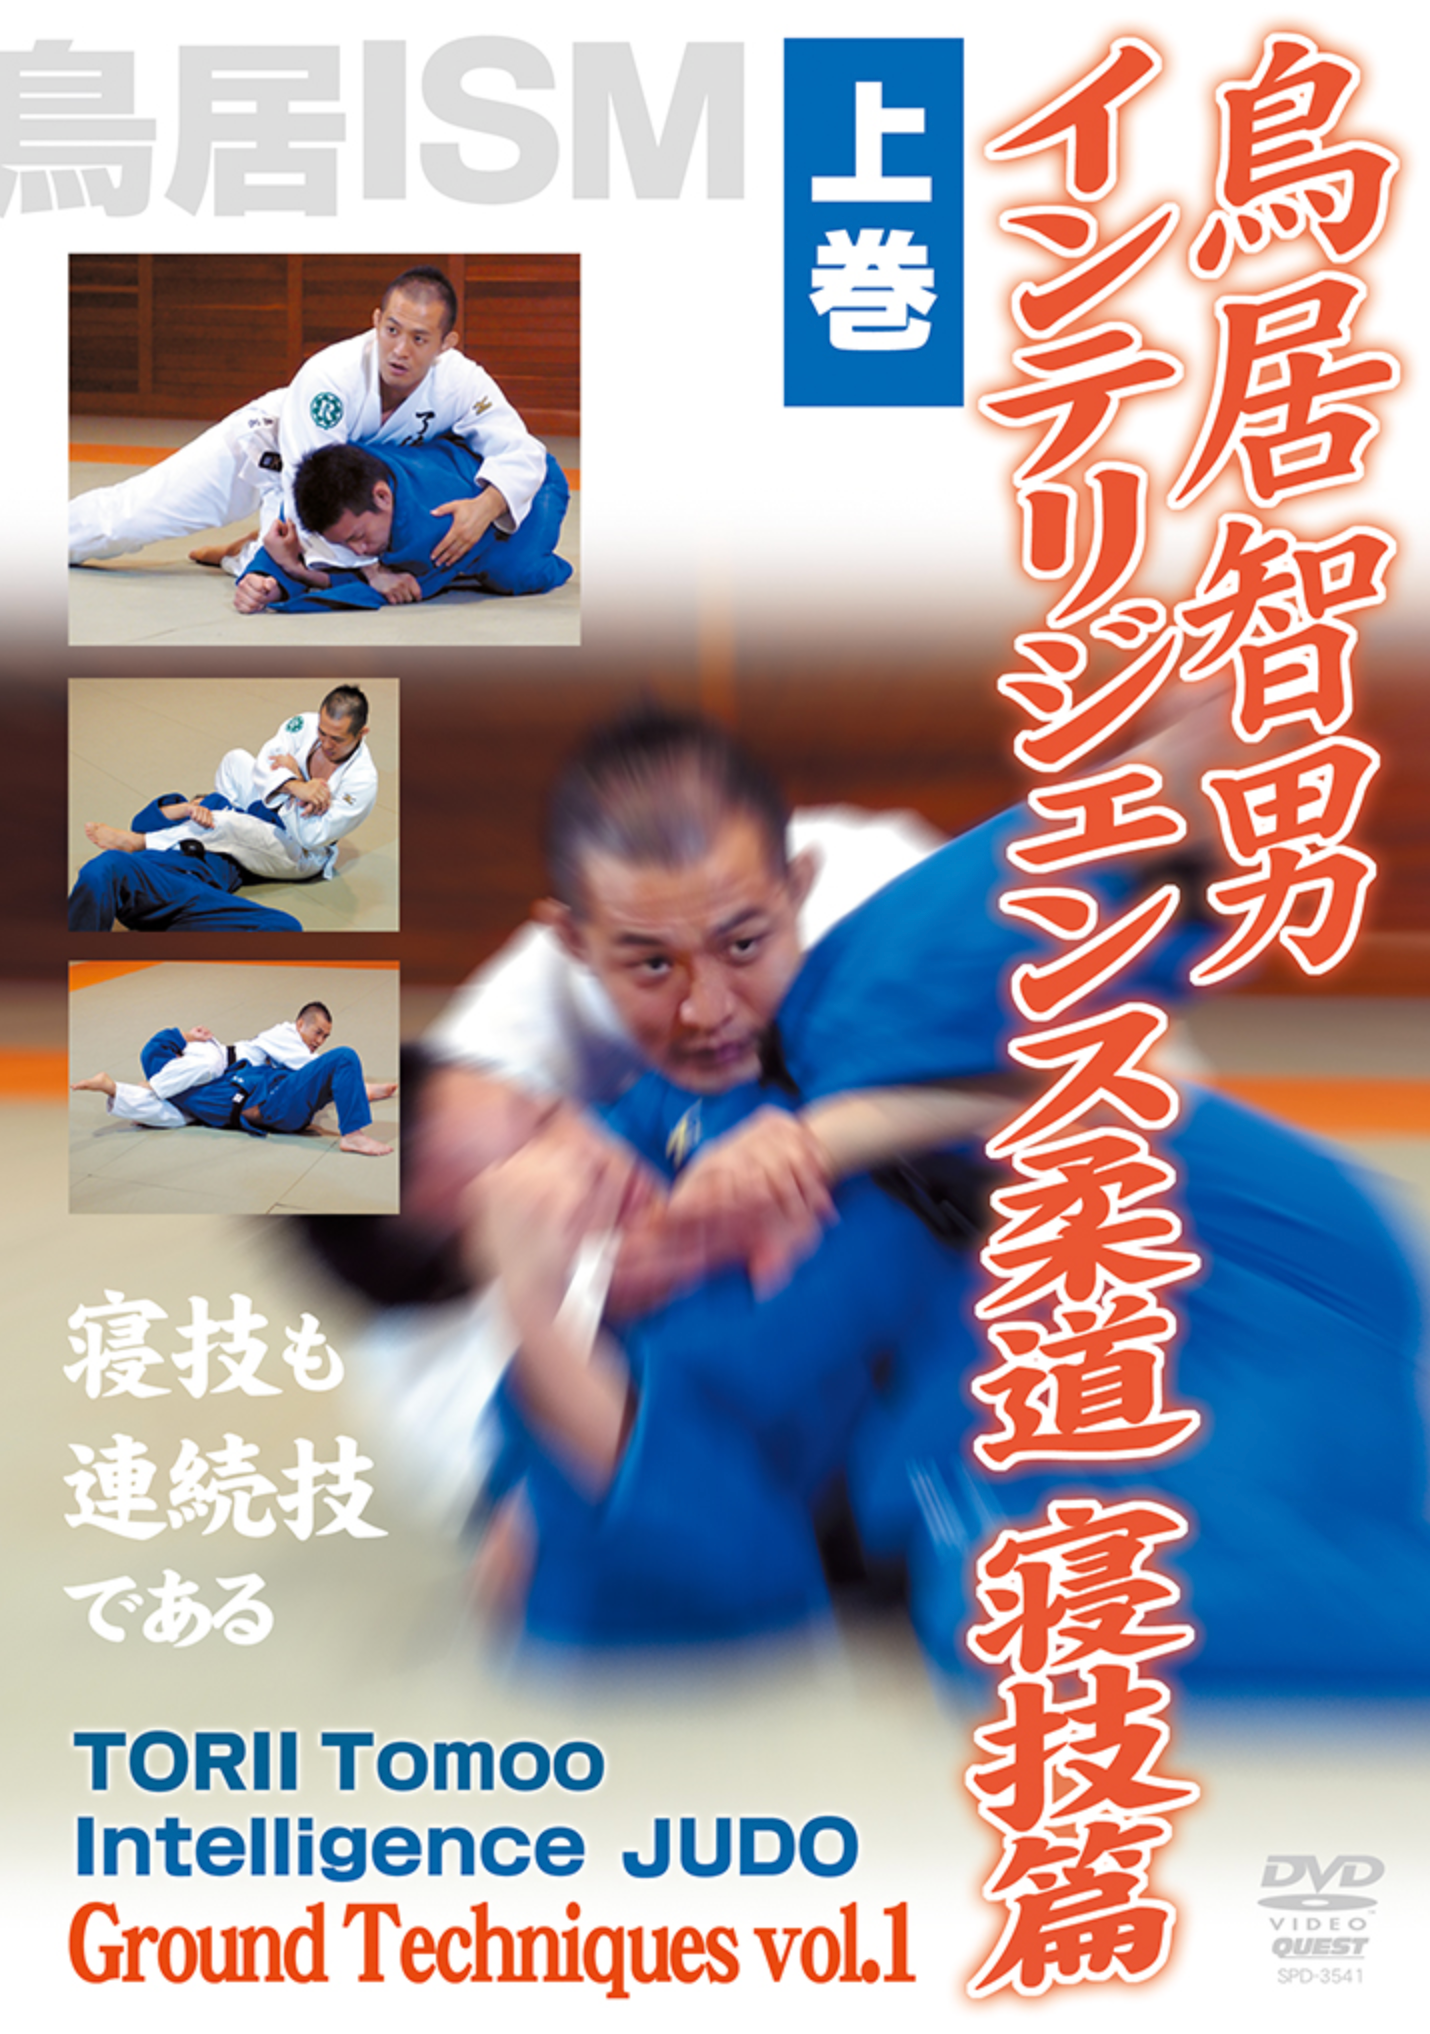 Intelligence Judo Ground Techniques DVD 1 with Tomoo Torii - Budovideos Inc